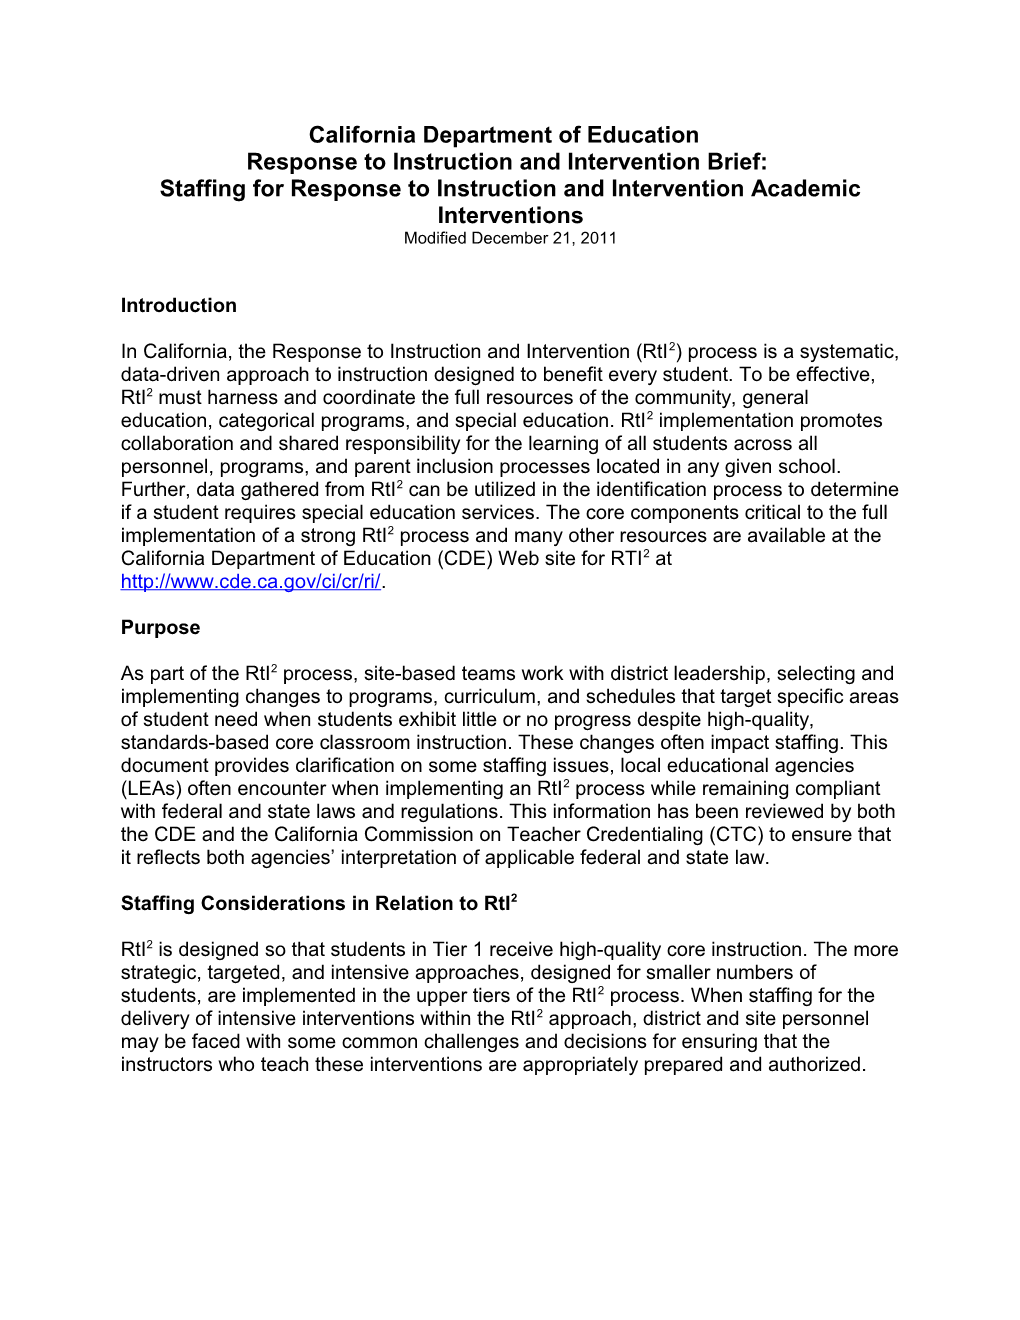 Response to Instruction & Intervention Brief - Multi-Tiered System of Supports (CA Dept